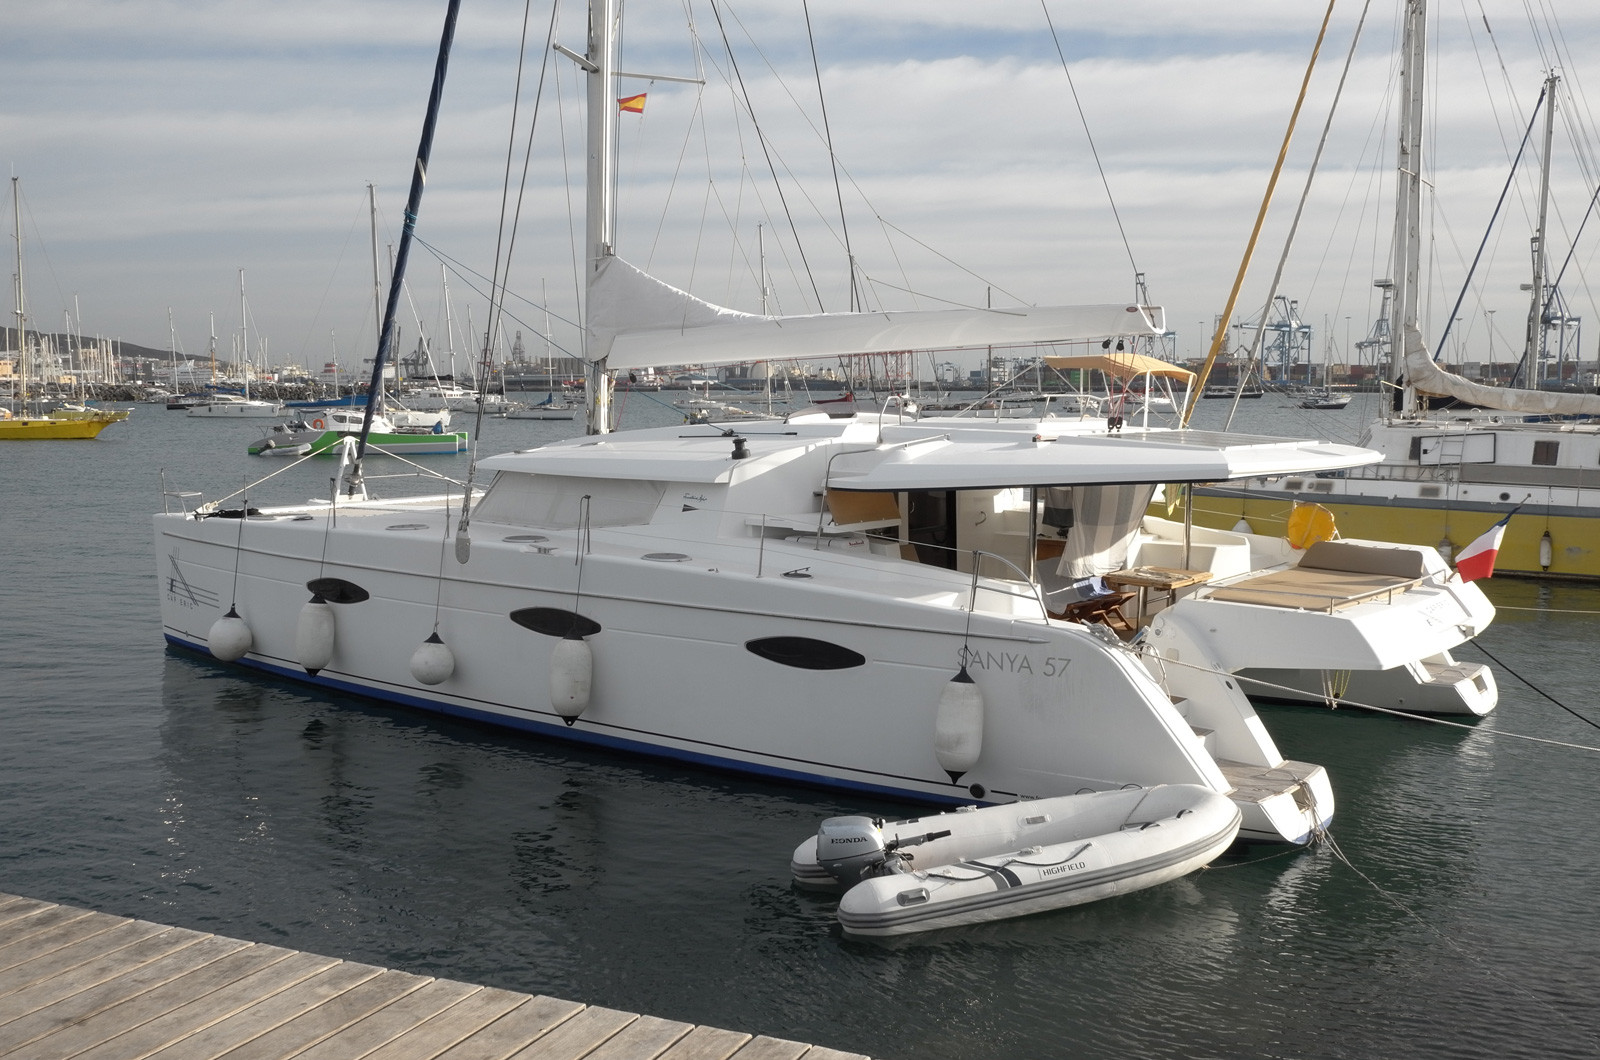 sanya 57 - skippered with watermaker & a/c - plus